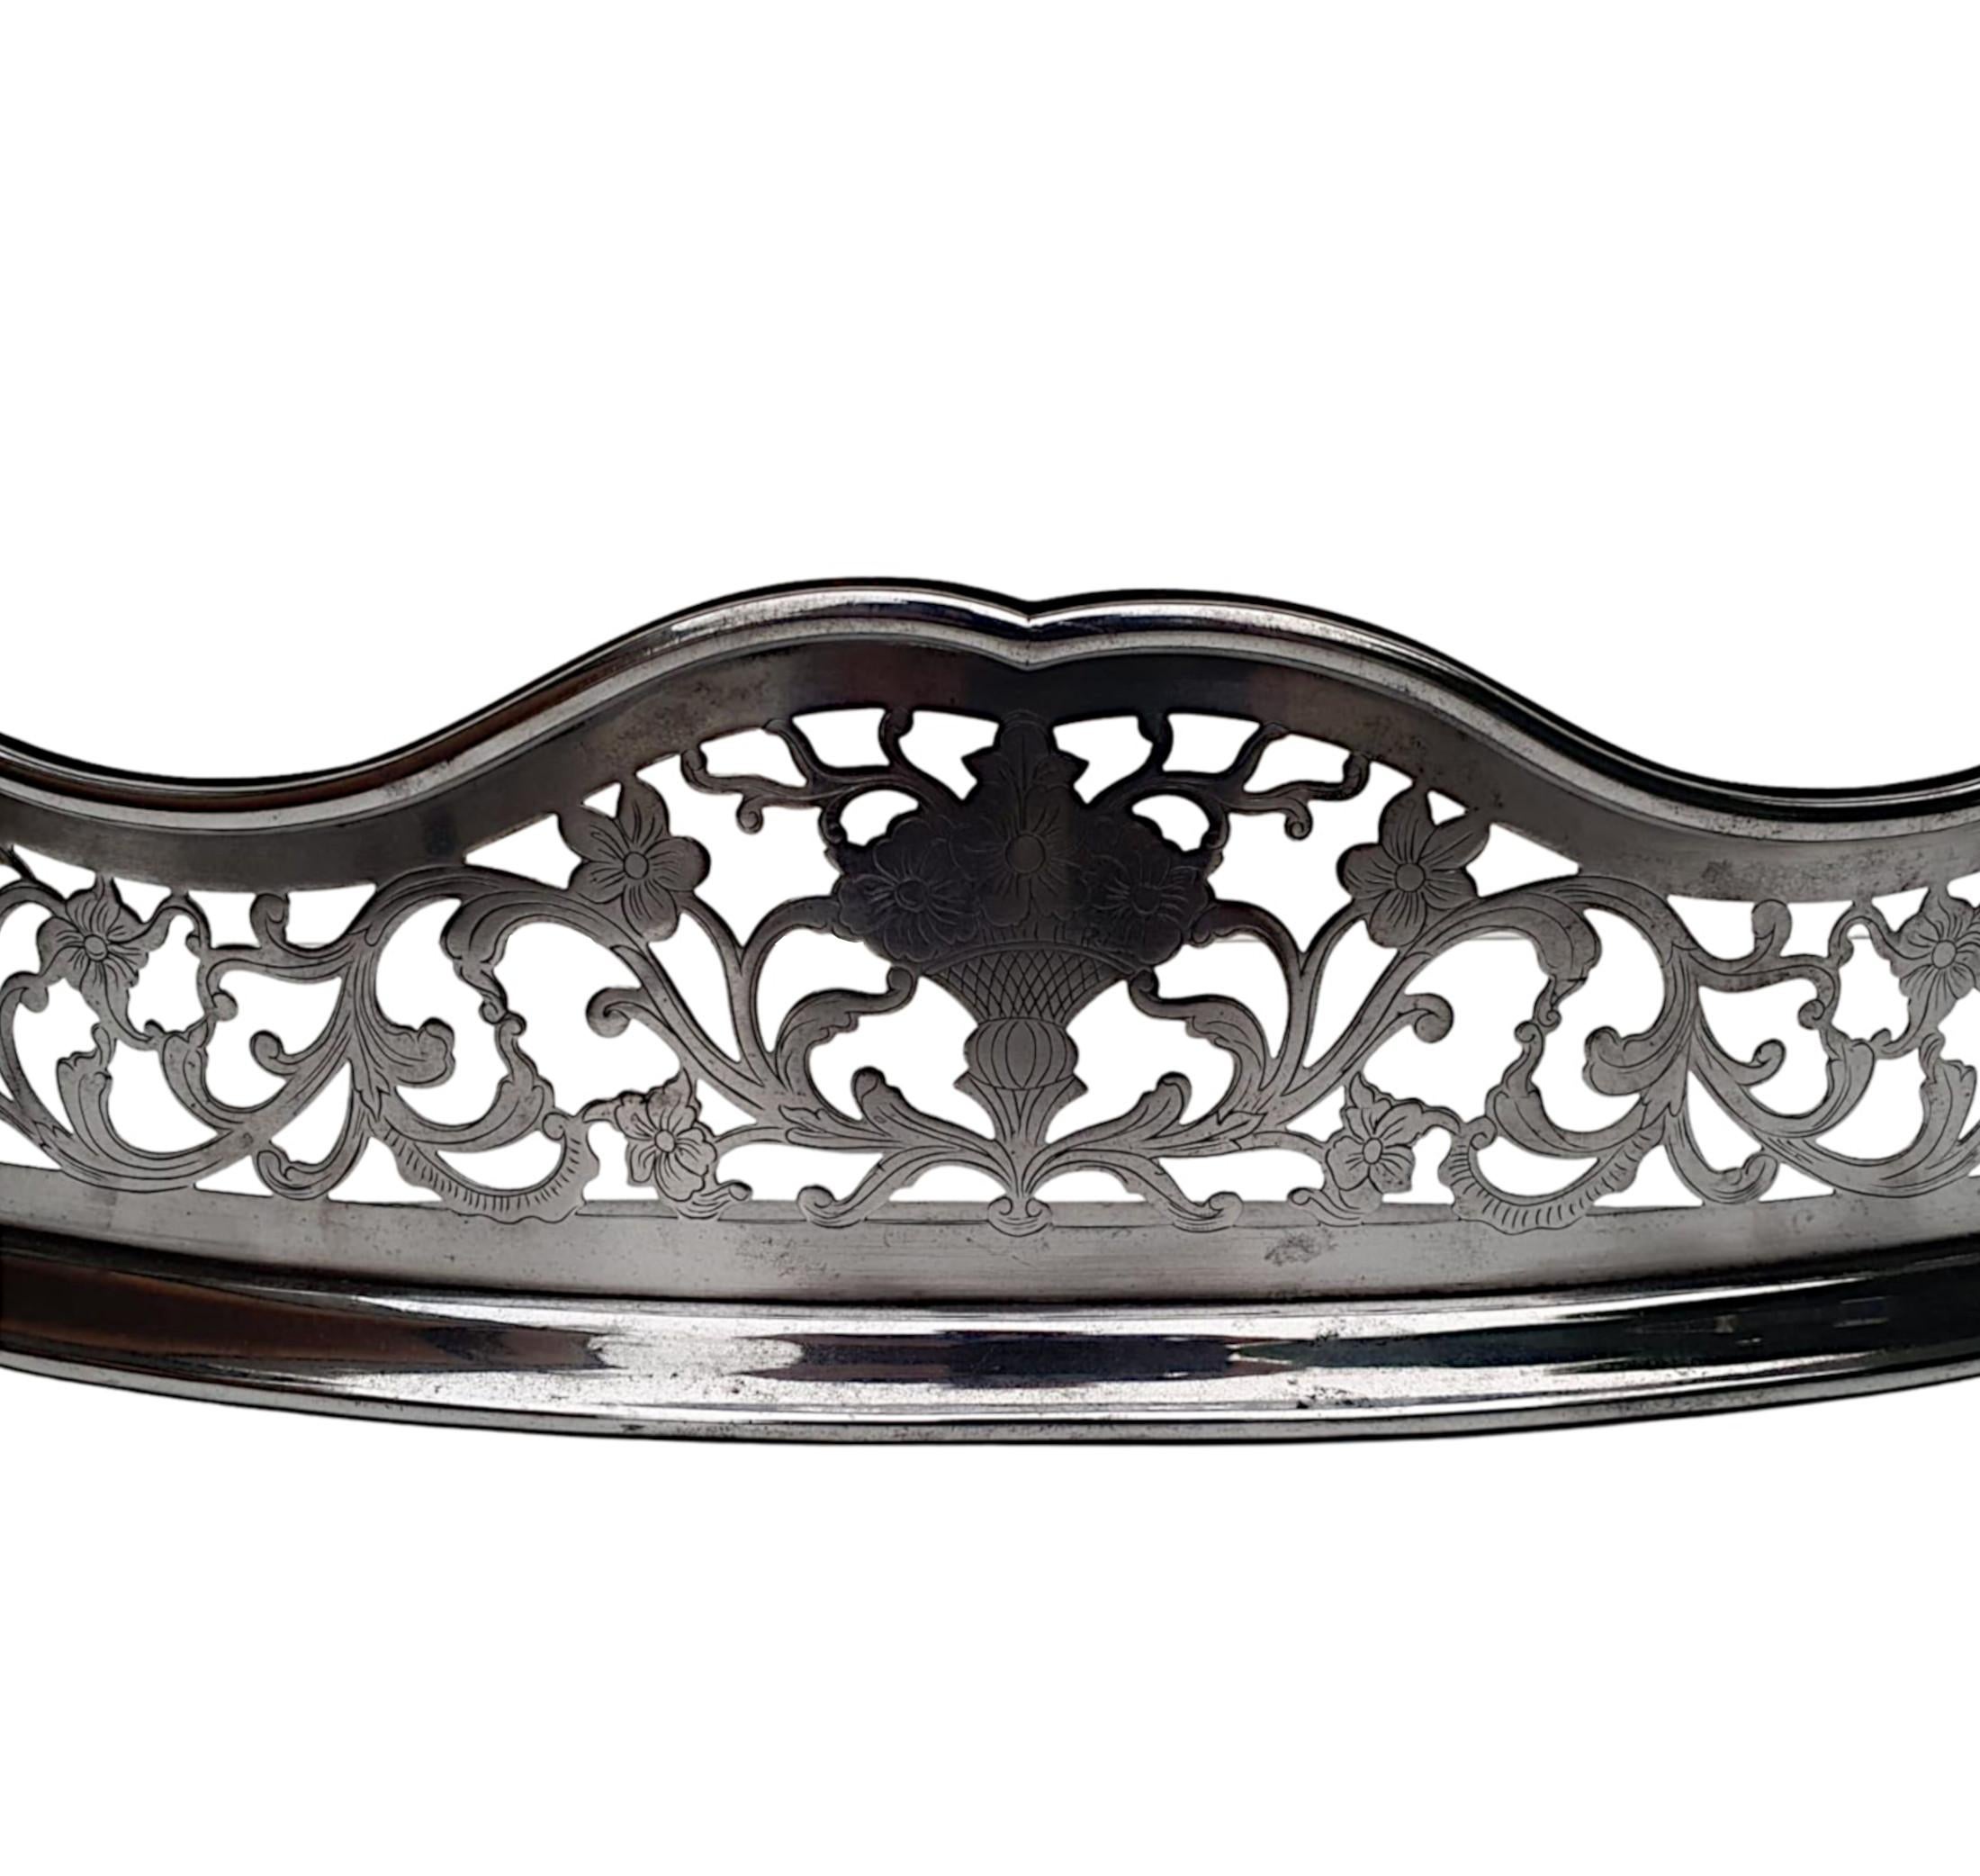 A Rare and fine 19th century polished steel curb fender. The rolled top raised over pierced and shaped bowfront frieze with elegant scrolling foliate, flowerhead and dragon motif detail, supported on stepped platform base. 

Depth measured at